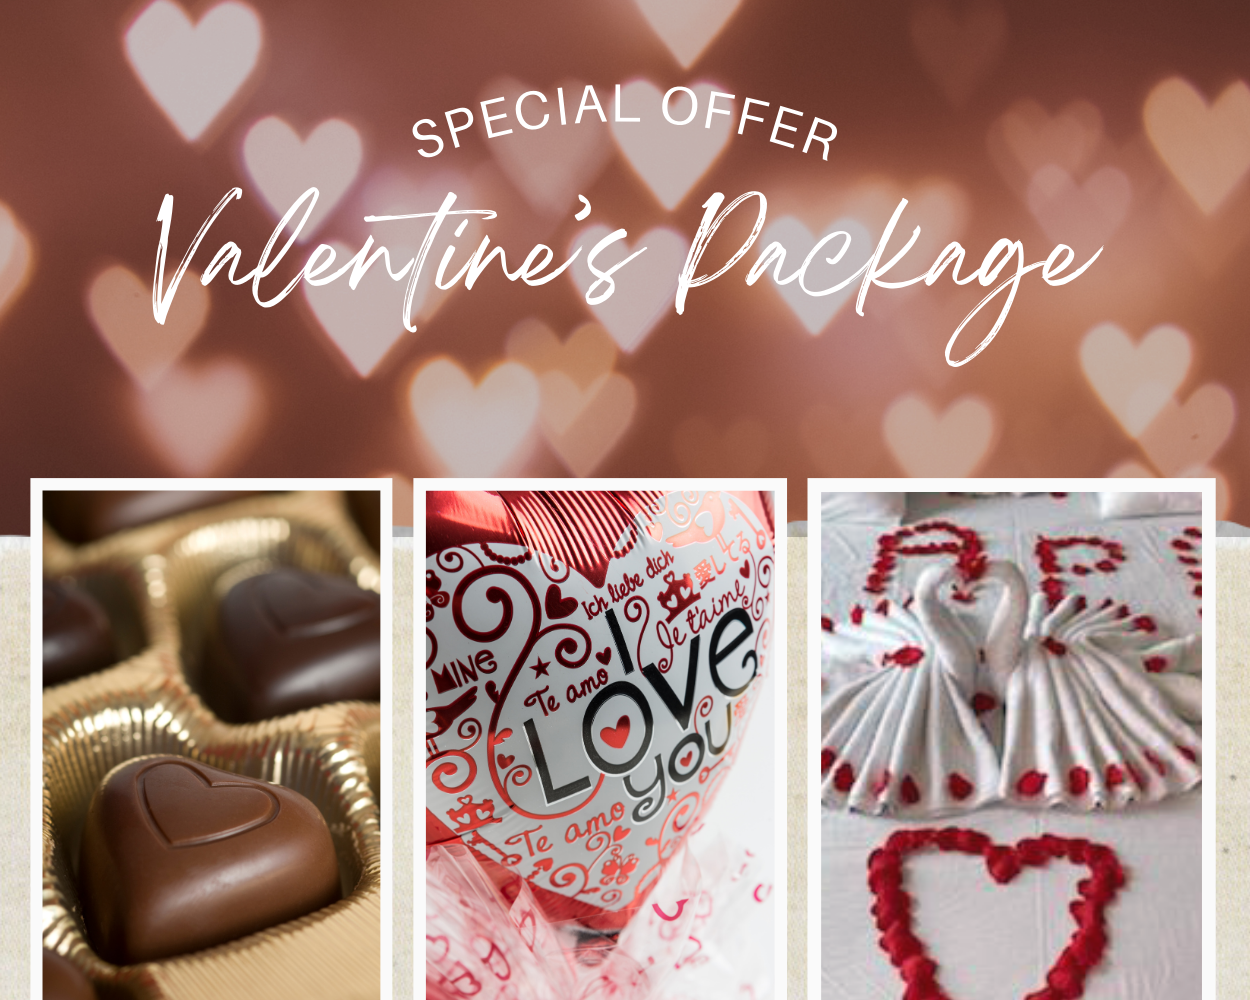 Picture with a valentine’s day background and heart bokeh with the words saying special offer – Valentine’s Day Package and three small framed pictures with chocolate candy hearts, balloons and rose petal on bed.